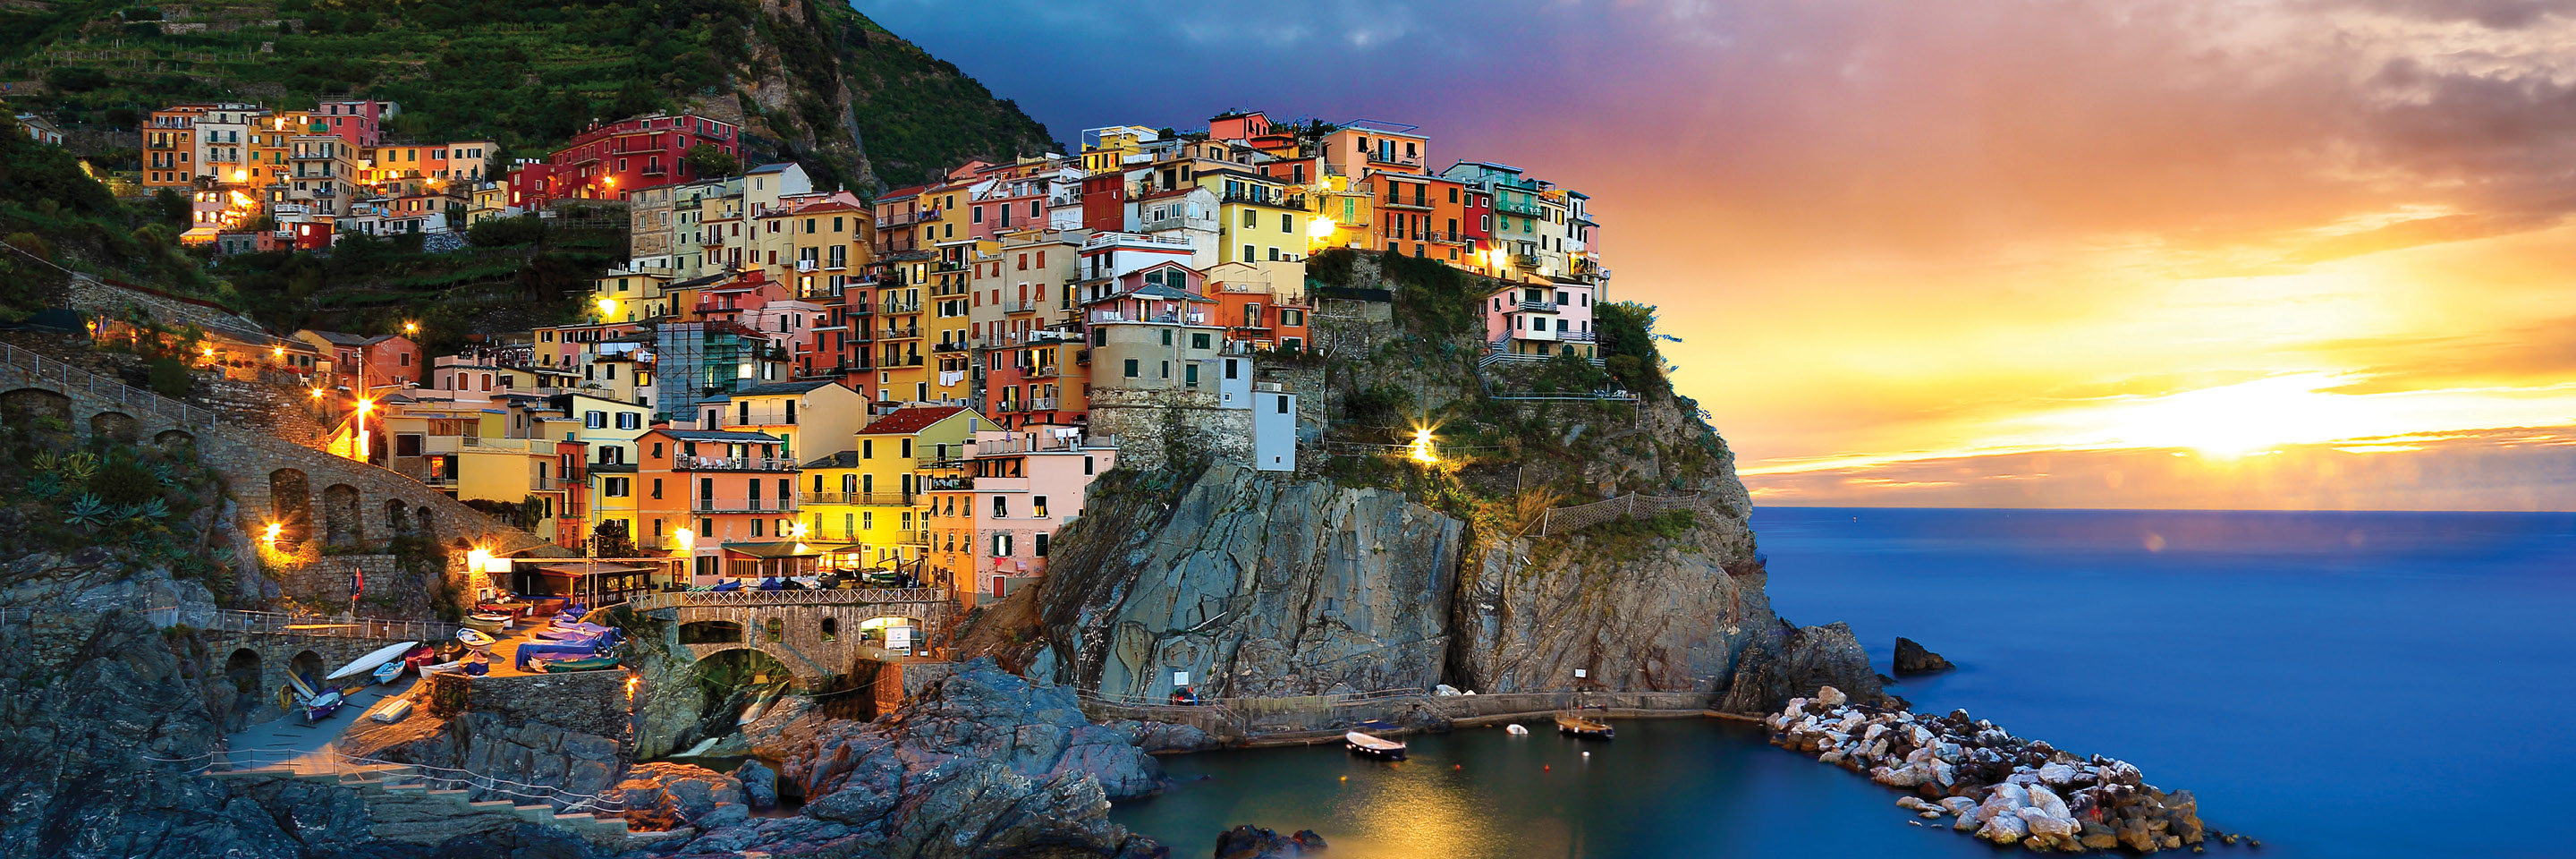 beautiful italy images